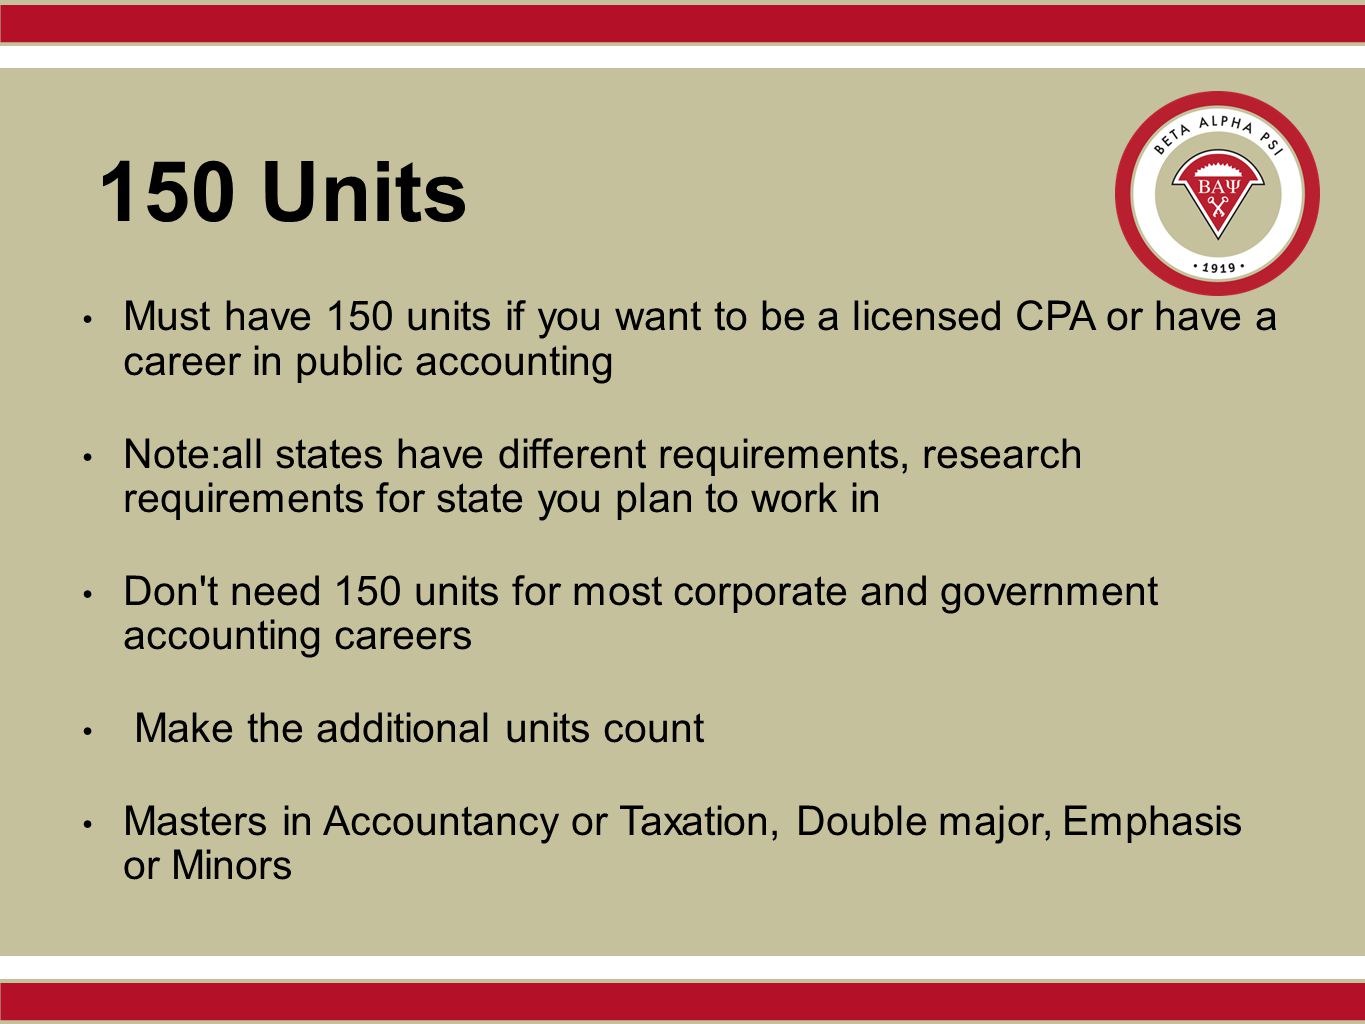 150 Units Must have 150 units if you want to be a licensed CPA or have a career in public accounting Note:all states have different requirements, research requirements for state you plan to work in Don t need 150 units for most corporate and government accounting careers Make the additional units count Masters in Accountancy or Taxation, Double major, Emphasis or Minors